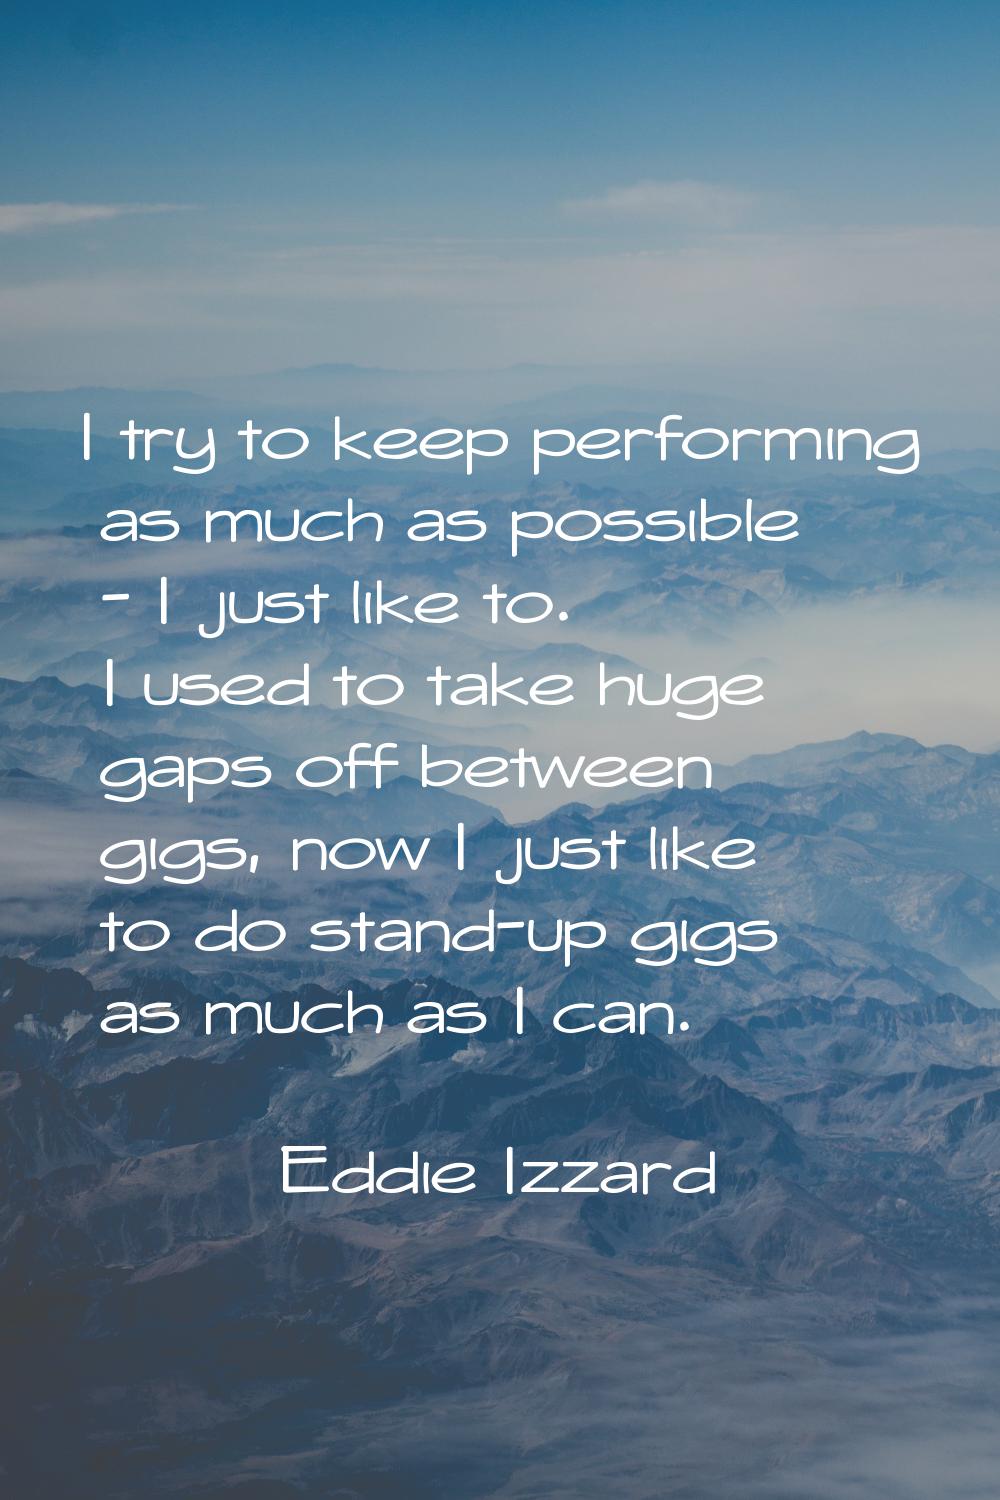 I try to keep performing as much as possible - I just like to. I used to take huge gaps off between